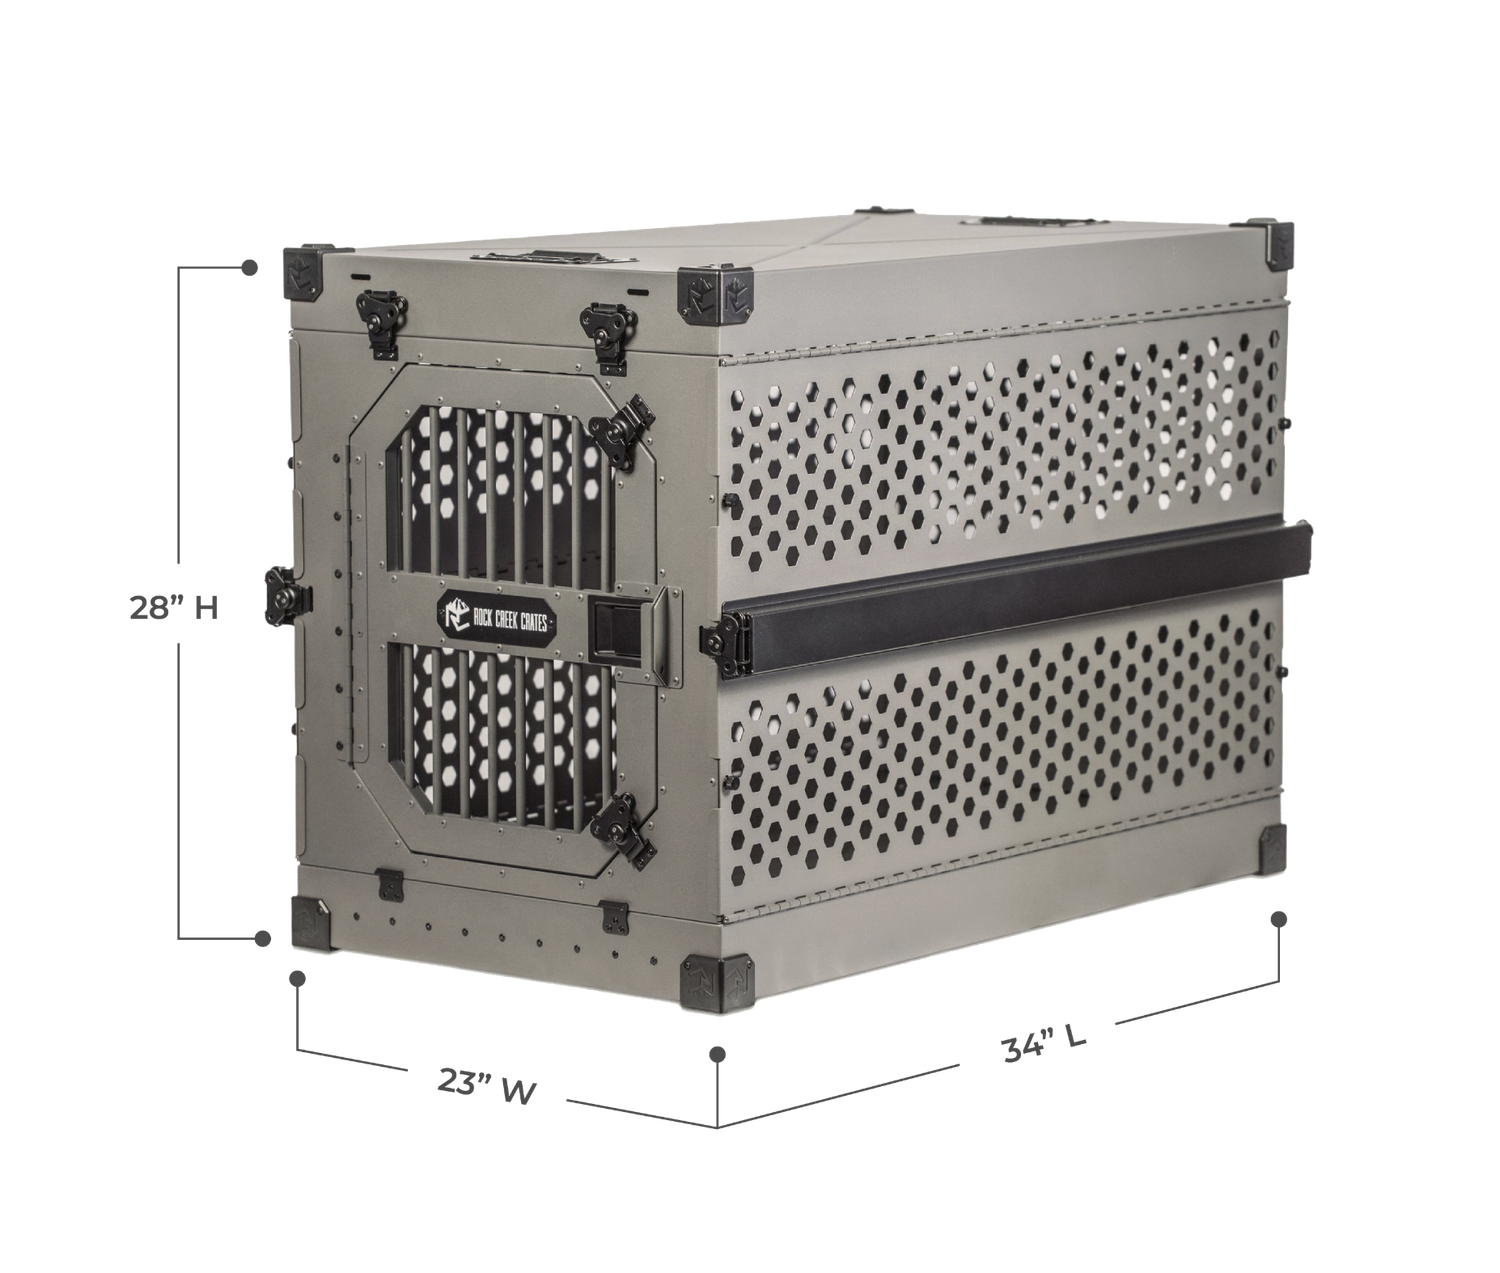 Large-sized collapsible dog crate by Rock Creek Crates showing external dimensions